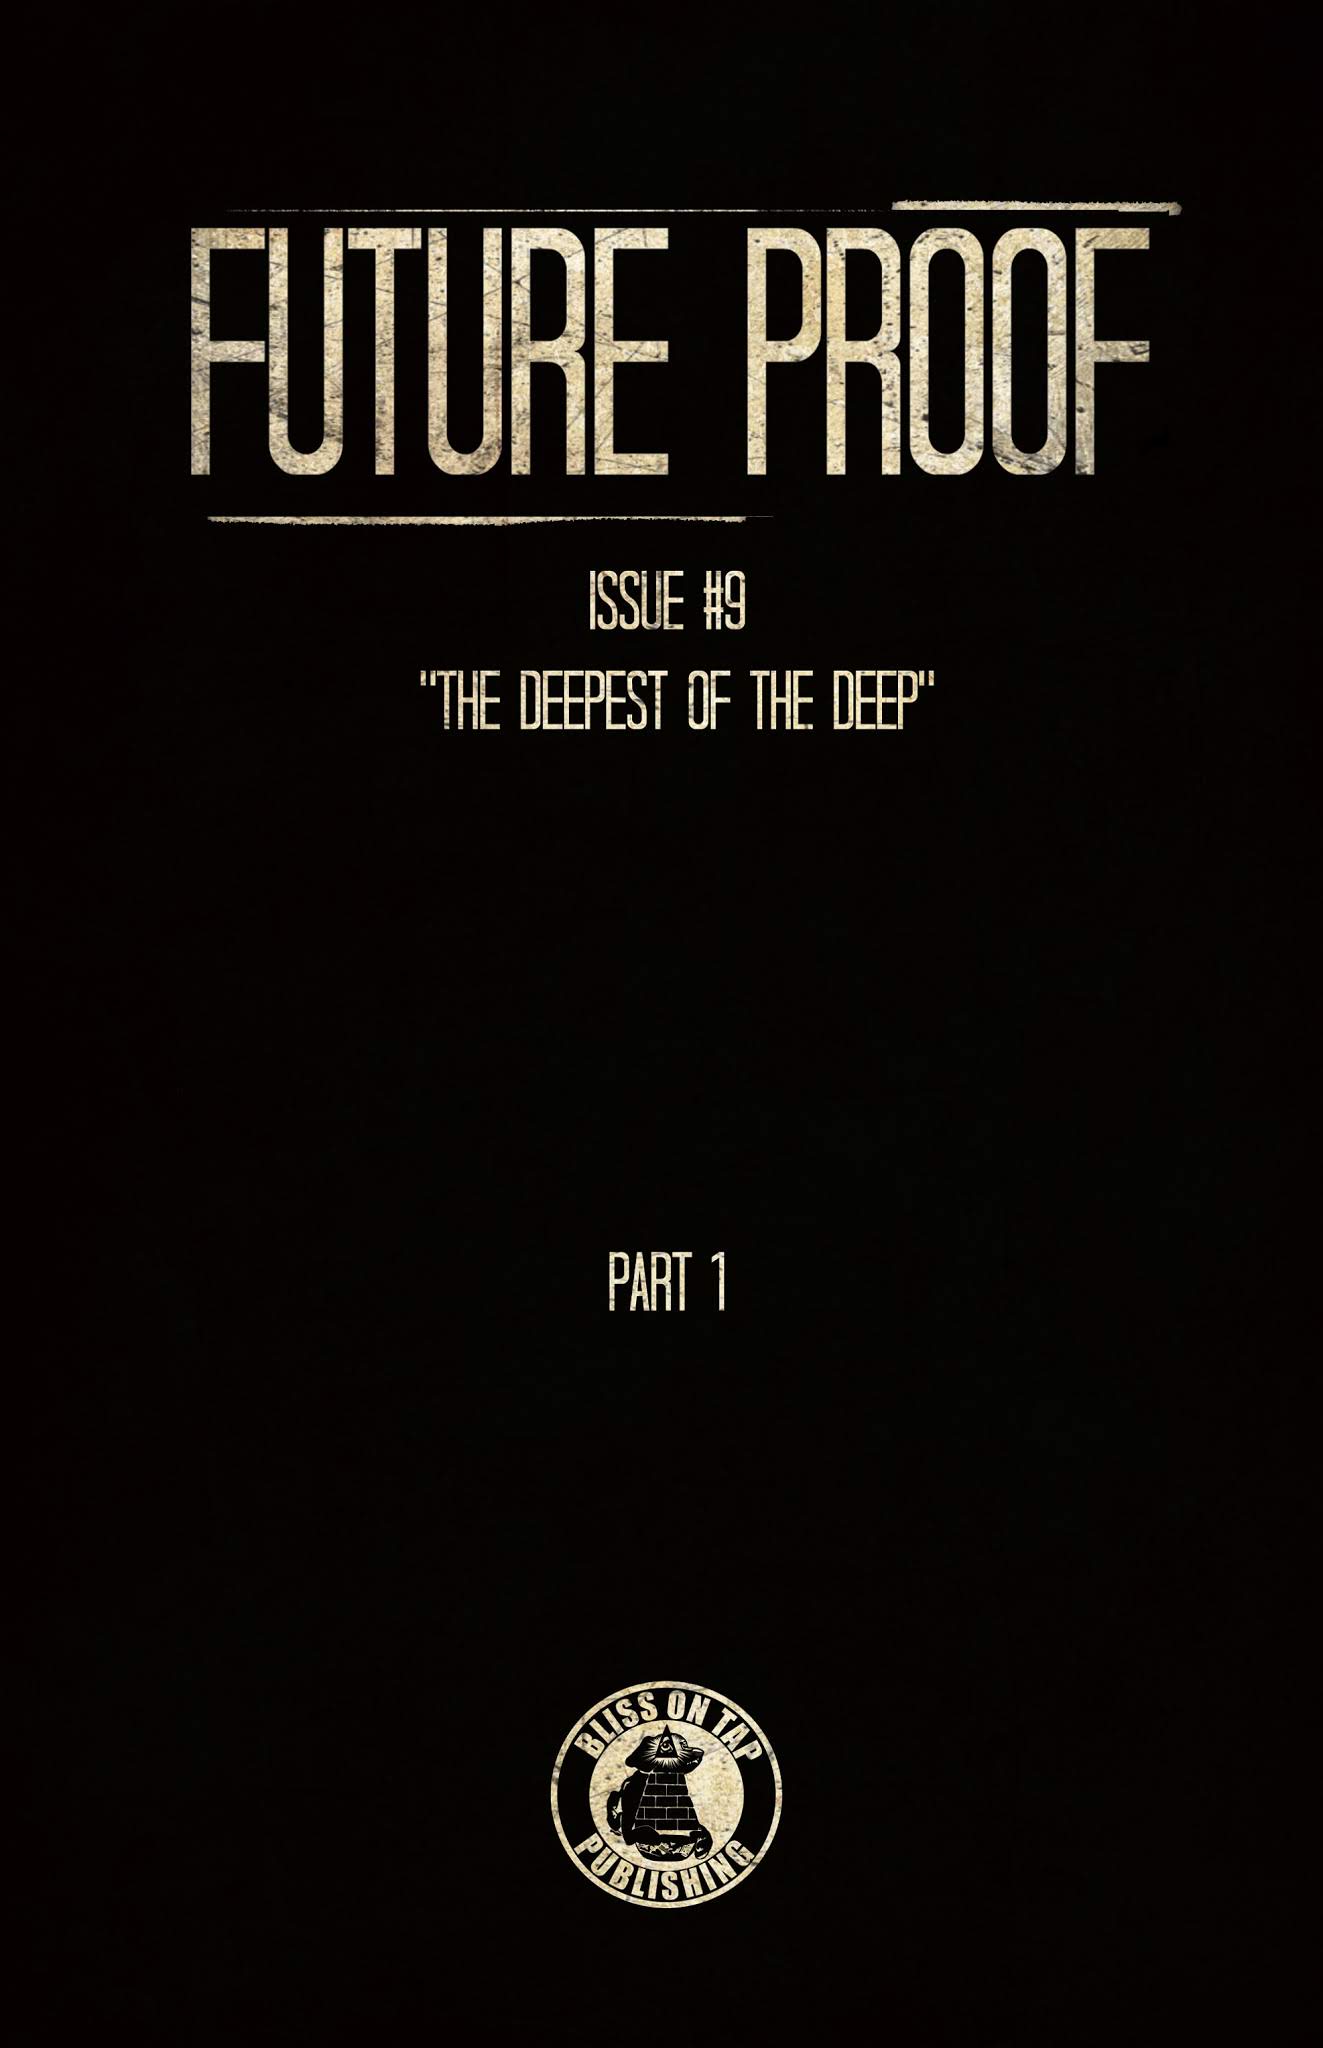 Read online Future Proof comic -  Issue #9 - 3